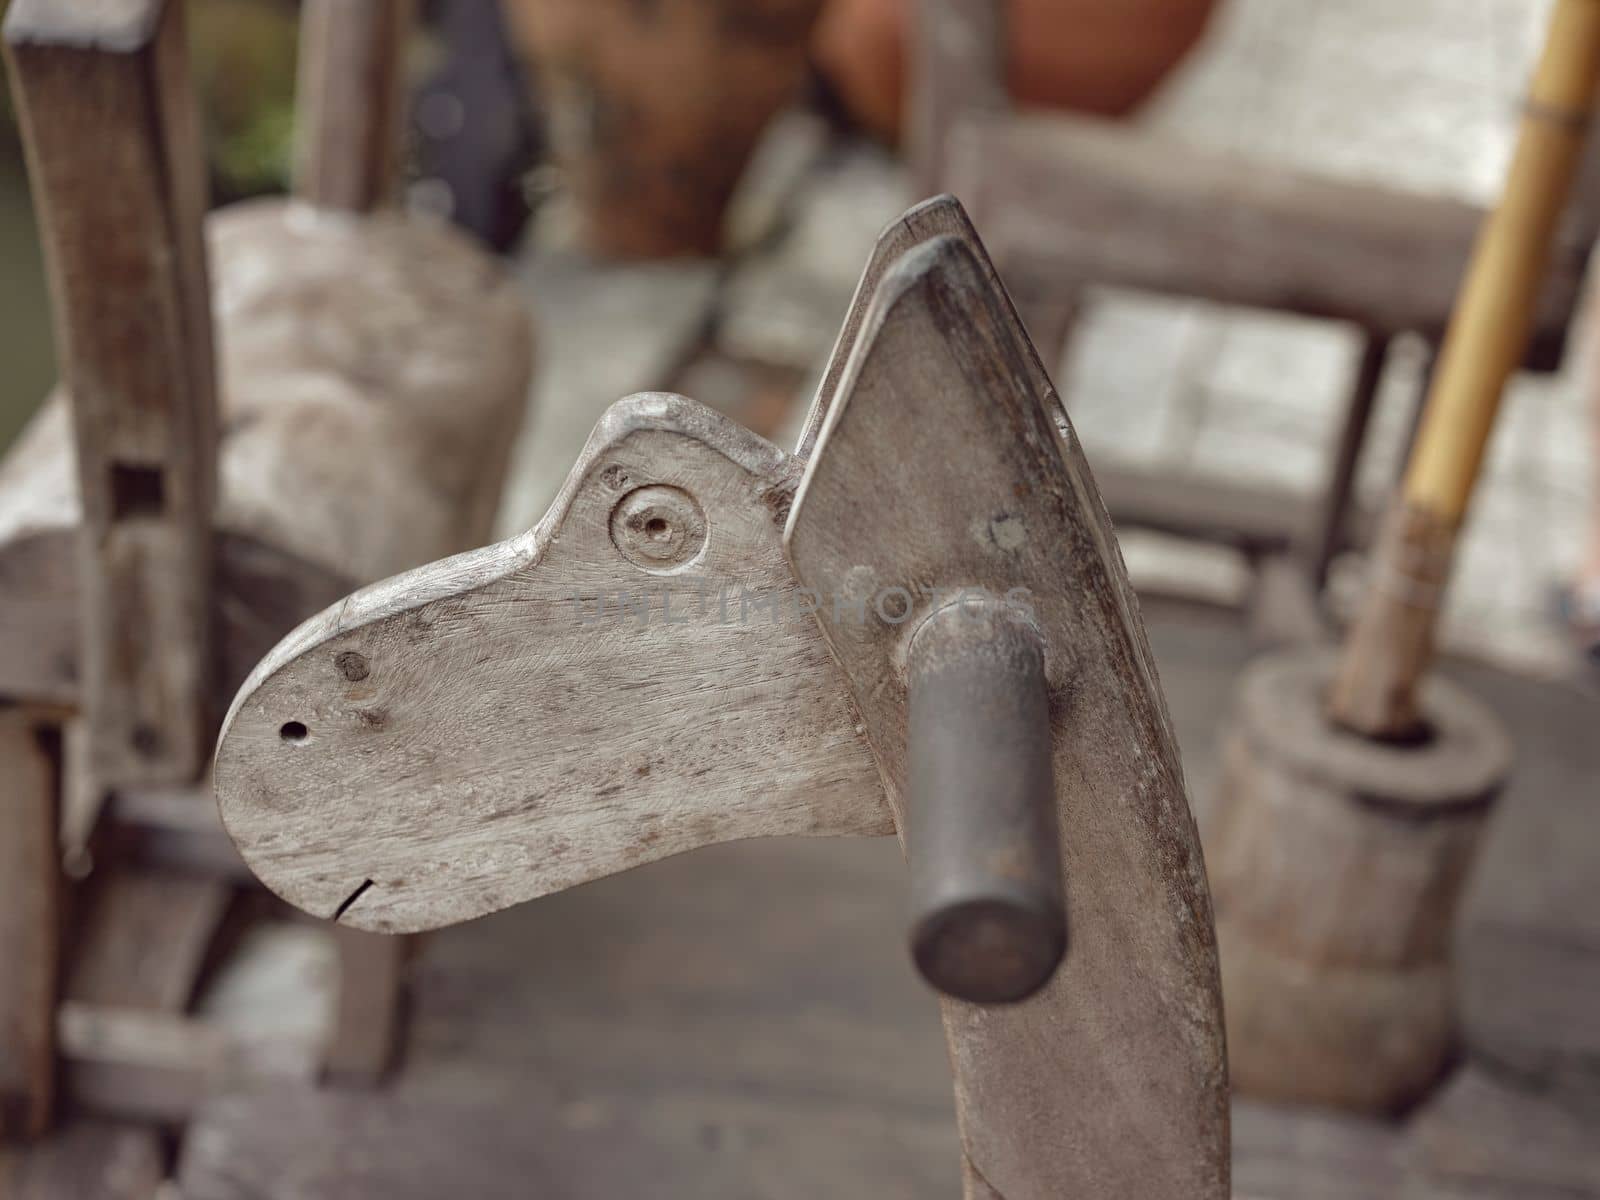 Close-up . Toy wooden rocking horse